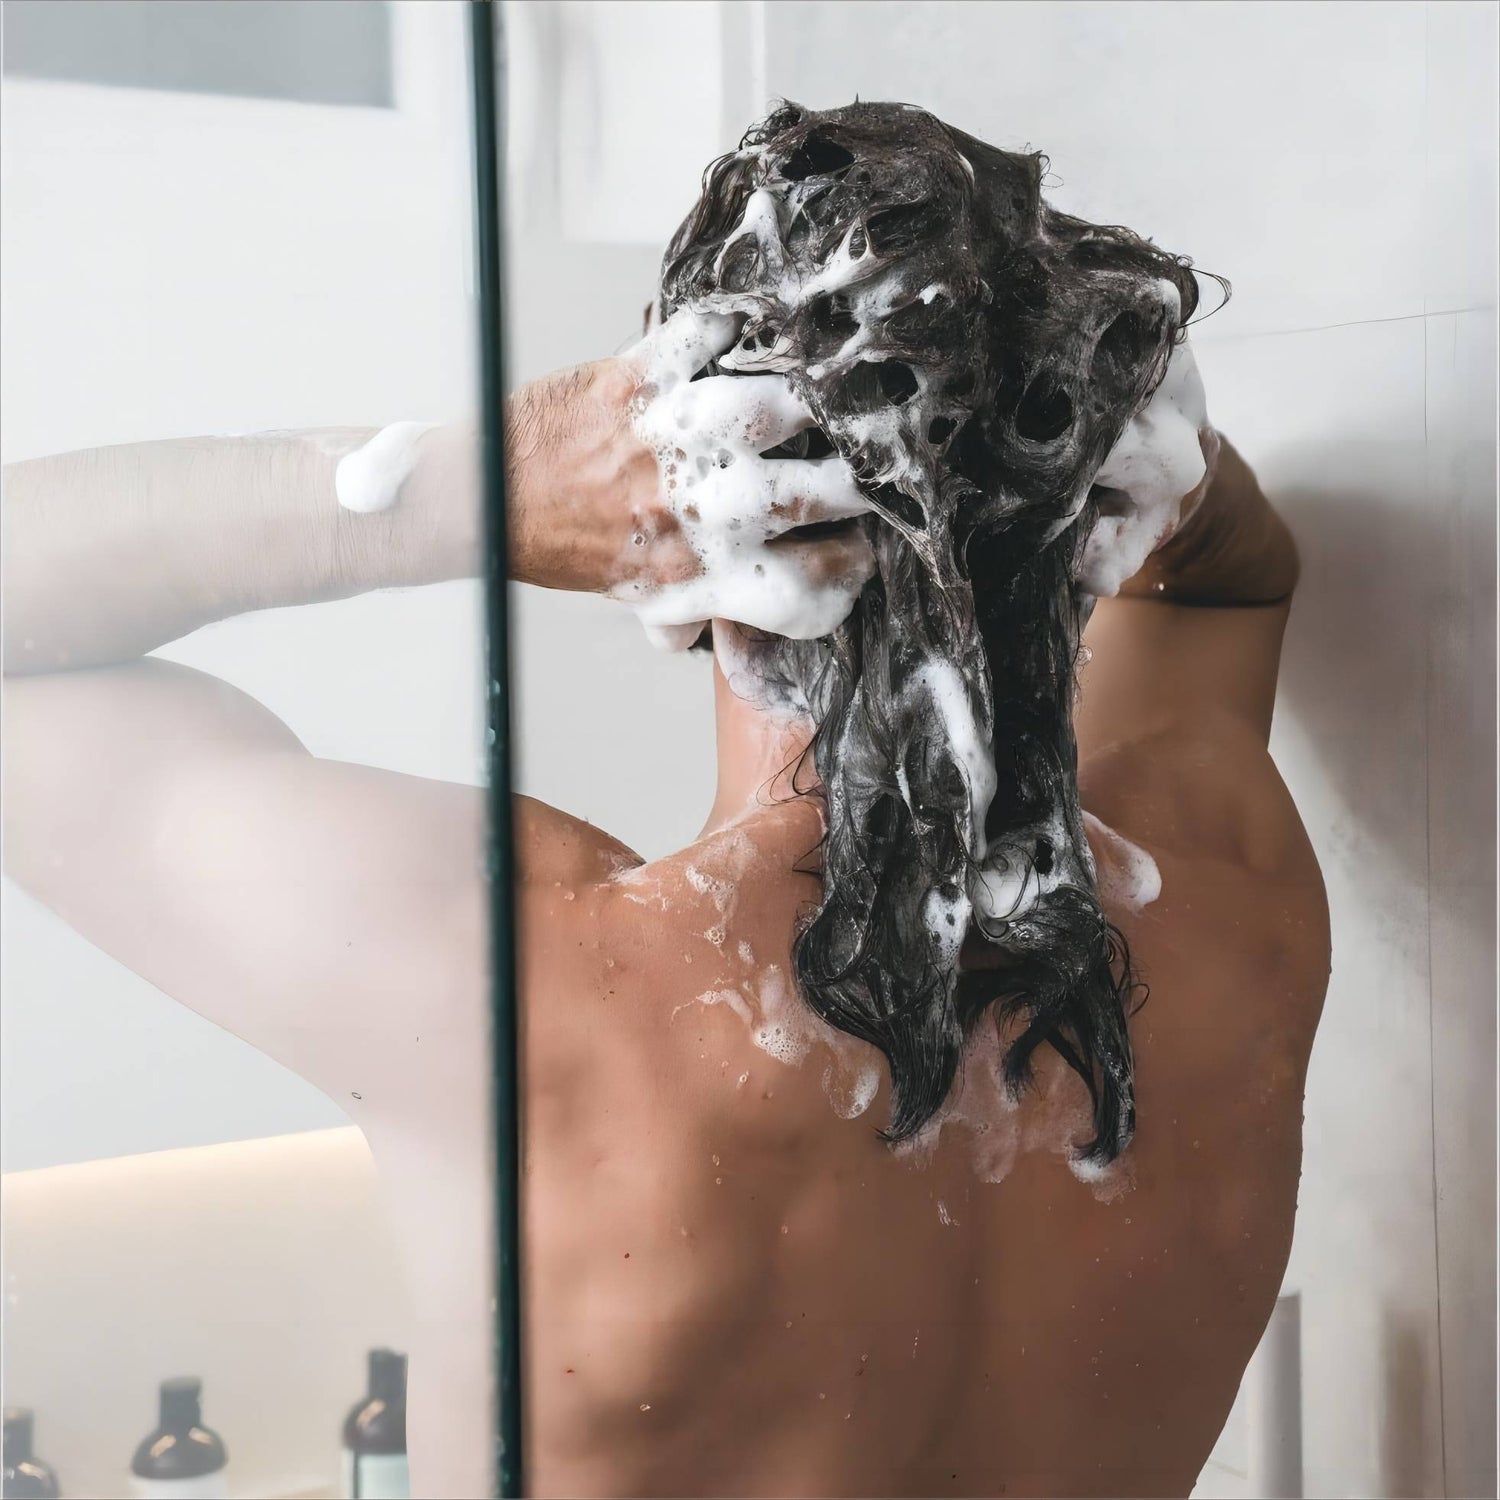 Whether you want a rainshower or a handheld shower, or replace your Moen showerhead, Delta showerhead, etc. Find the item that meets your needs and preferences.